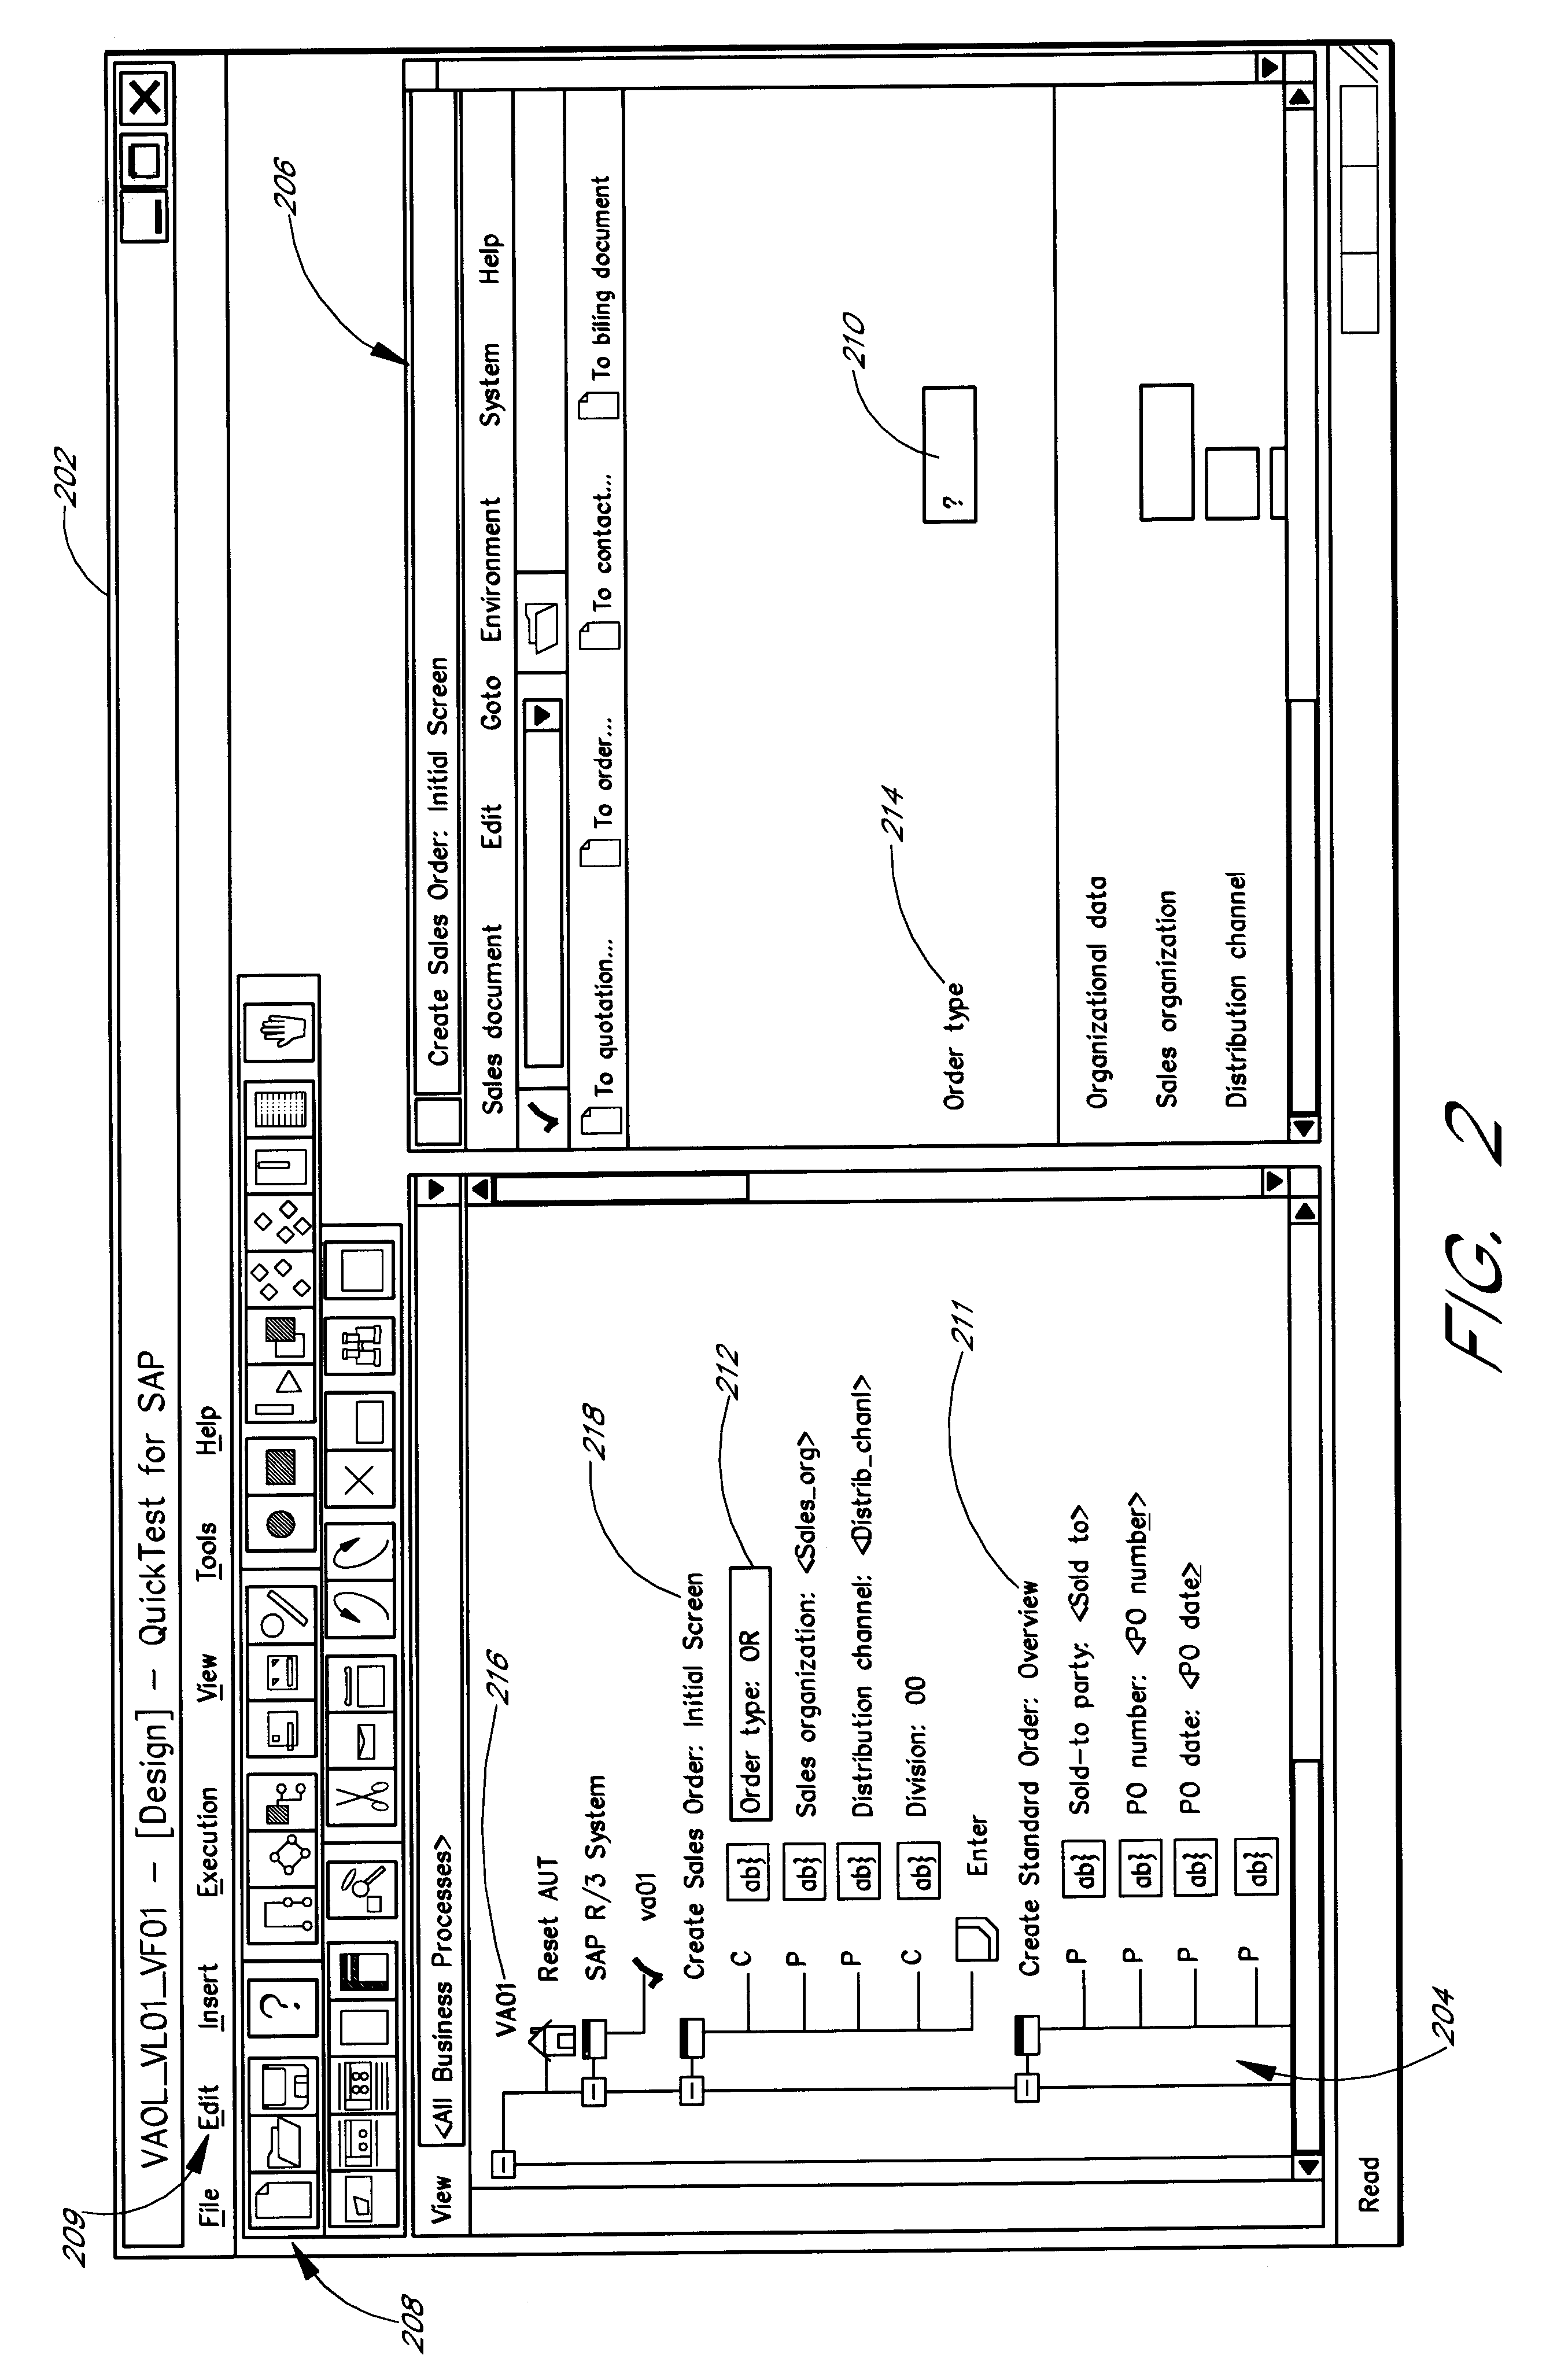 Software system and methods for testing the functionality of a transactional server